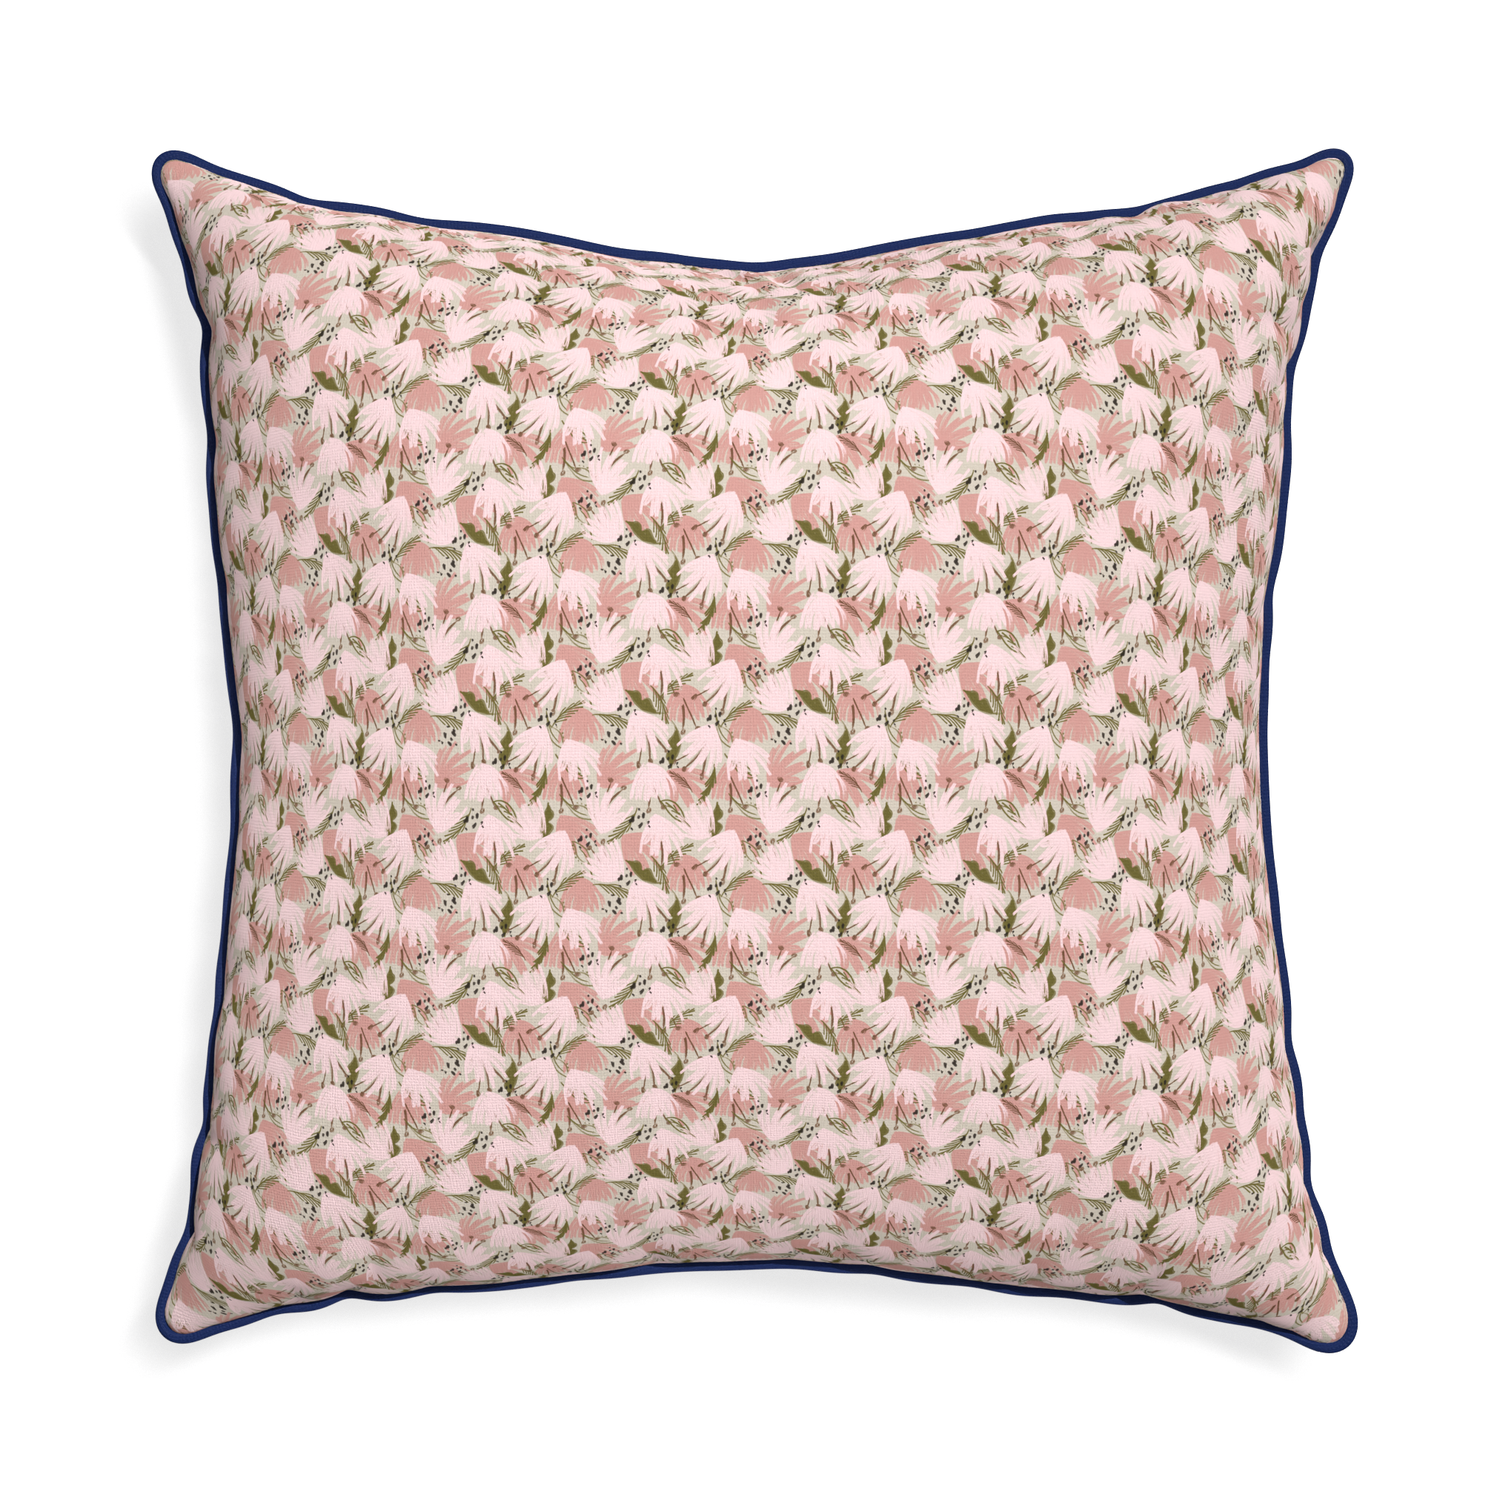 Euro-sham eden pink custom pillow with midnight piping on white background